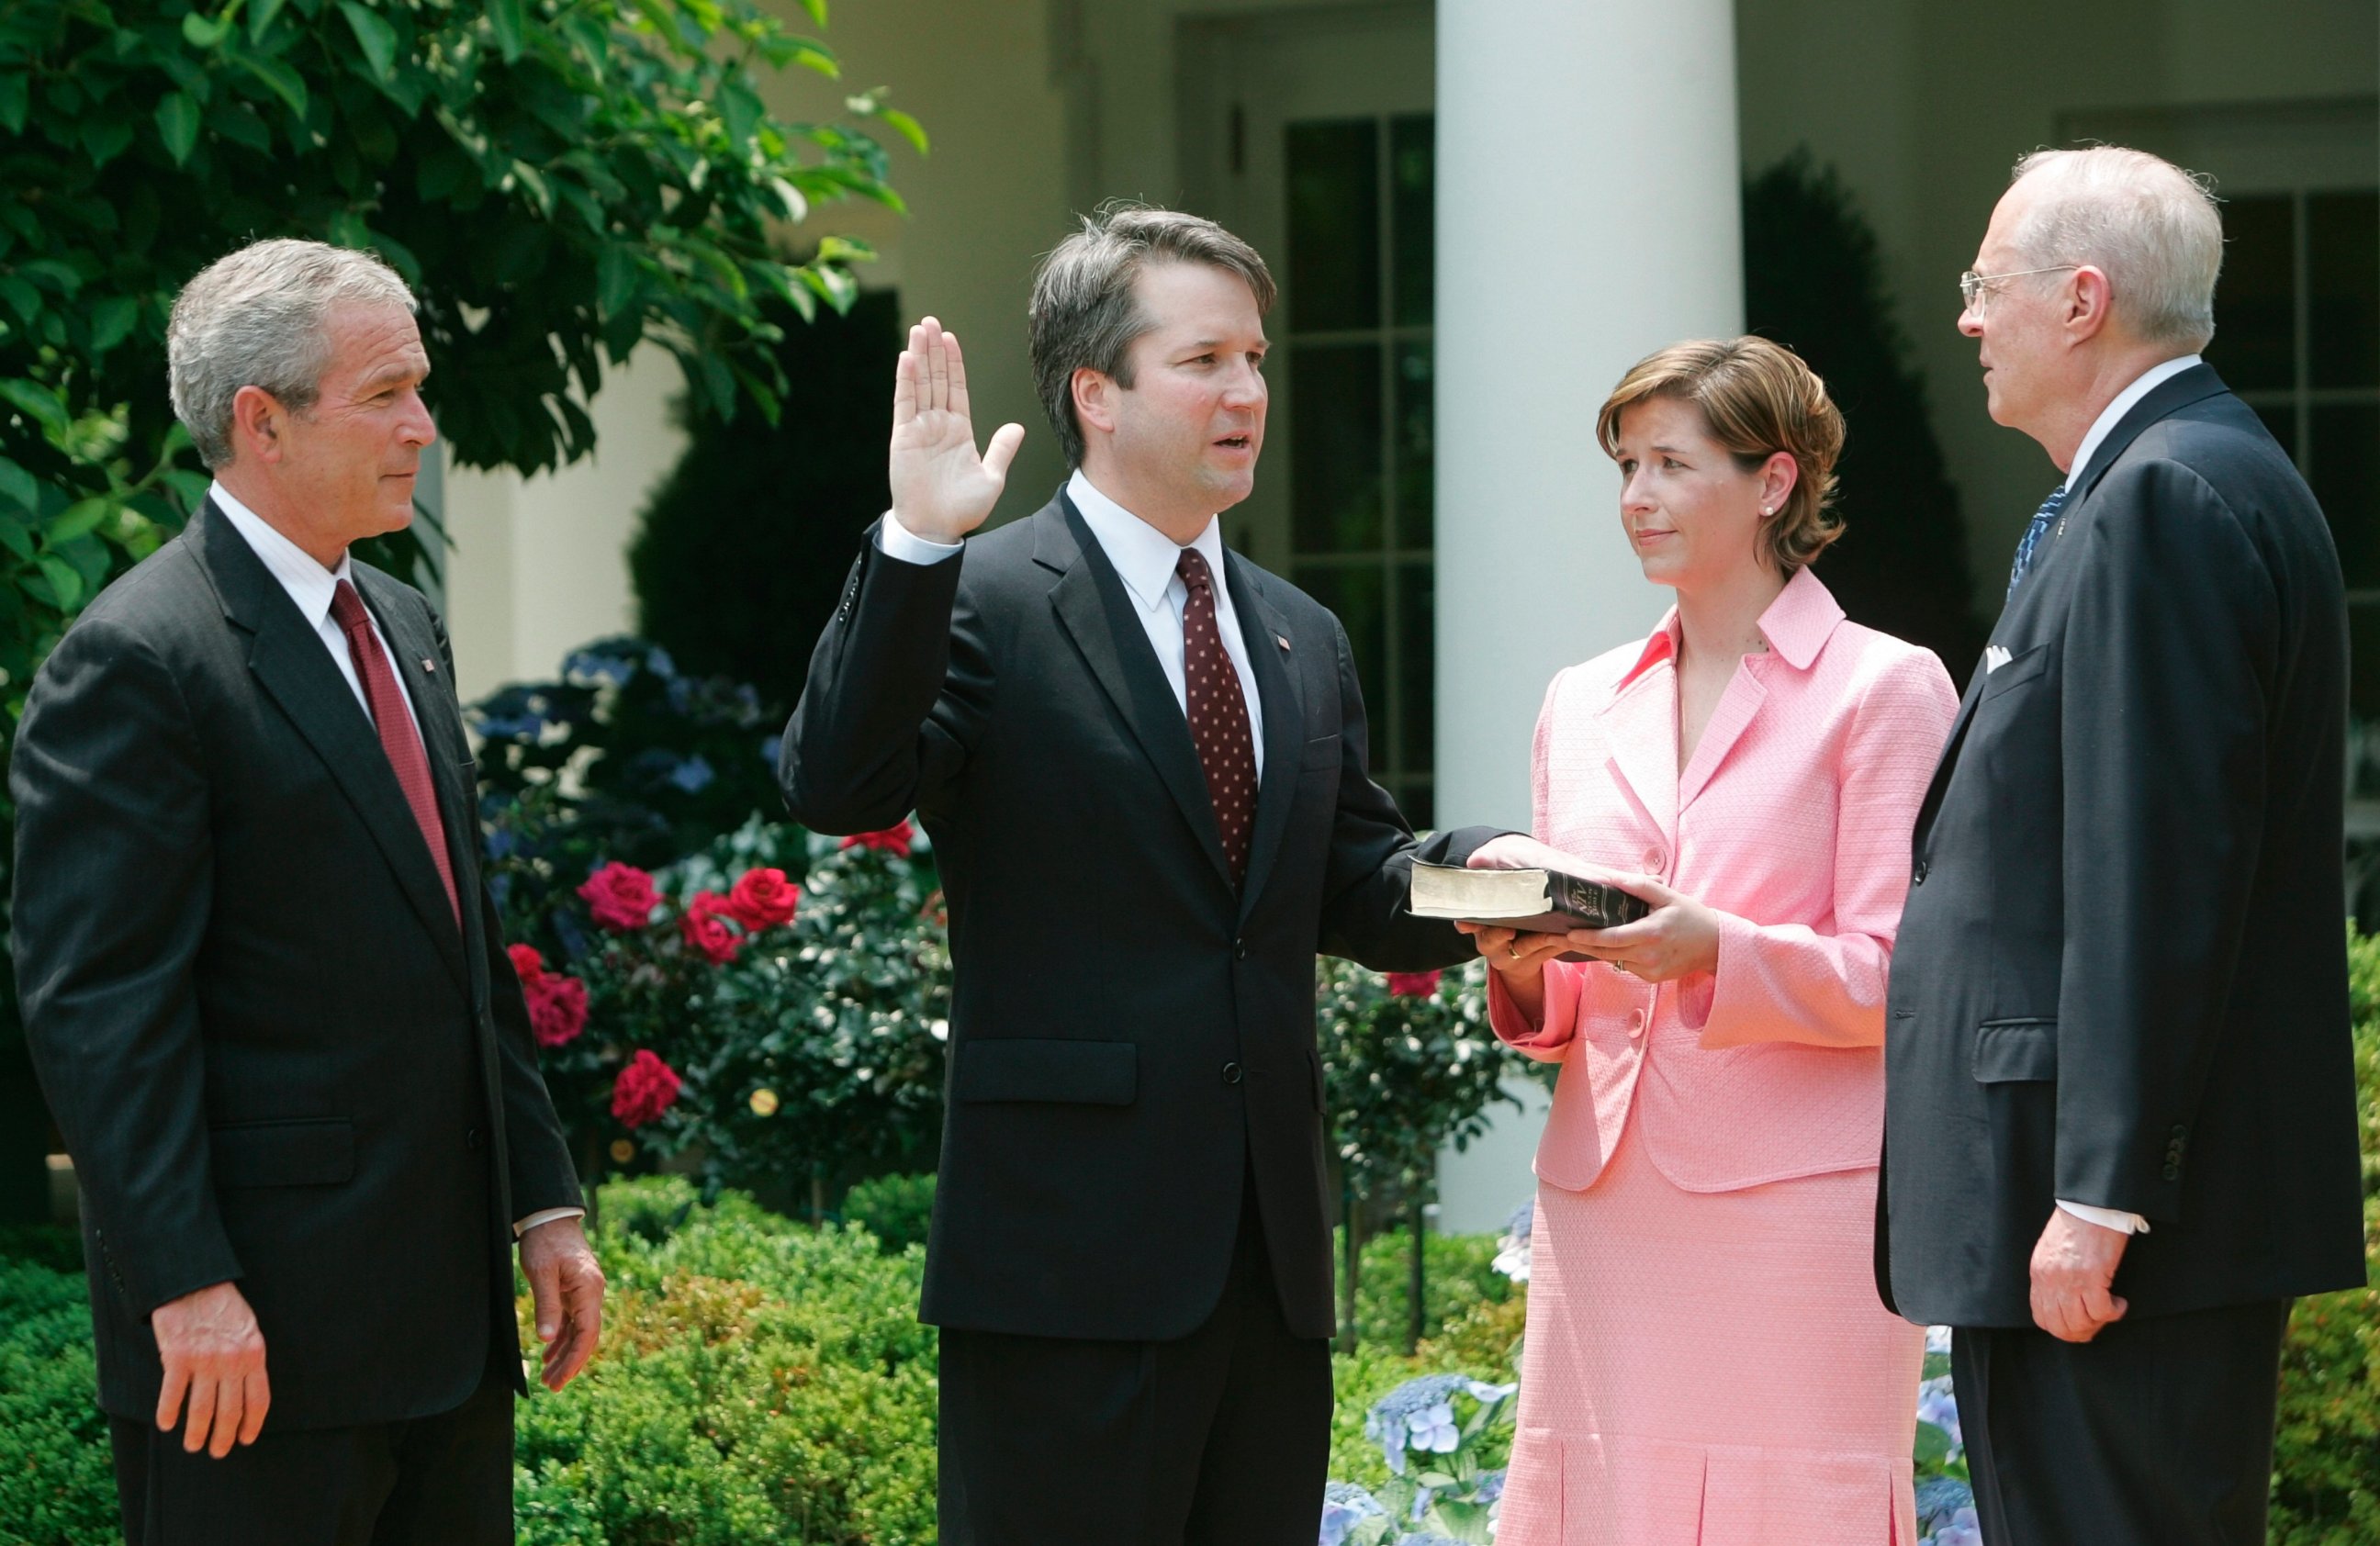 In this June 1, 2006 file photo, from left to right, President Bush, watches the swearing-in of Brett Kavanaugh as Judge for the U.S. Court of Appeals for the District of Columbia by U.S.